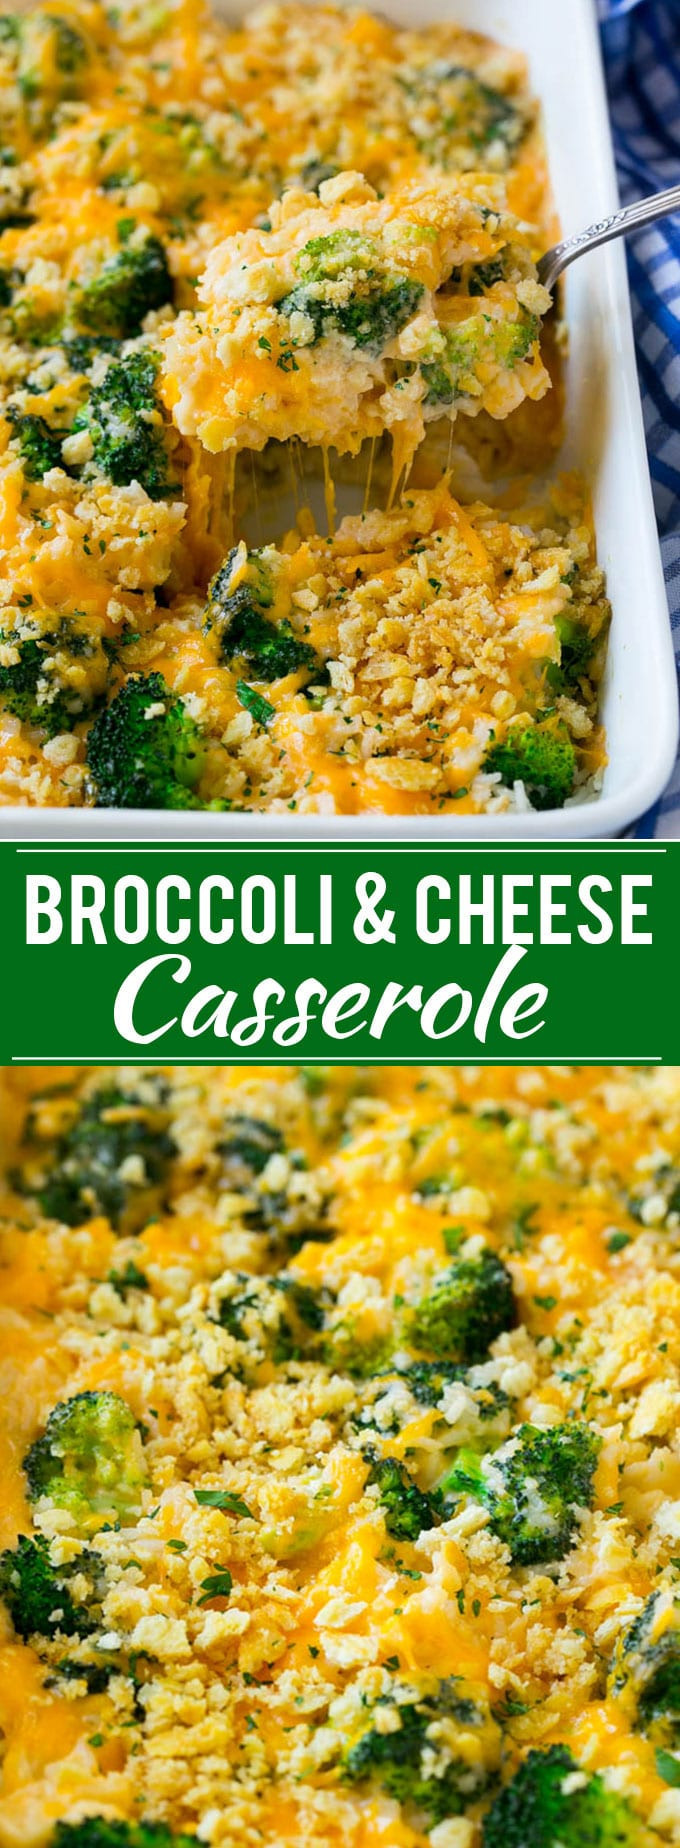 Recipes For Broccoli Rice Casserole
 Broccoli and Cheese Casserole Dinner at the Zoo